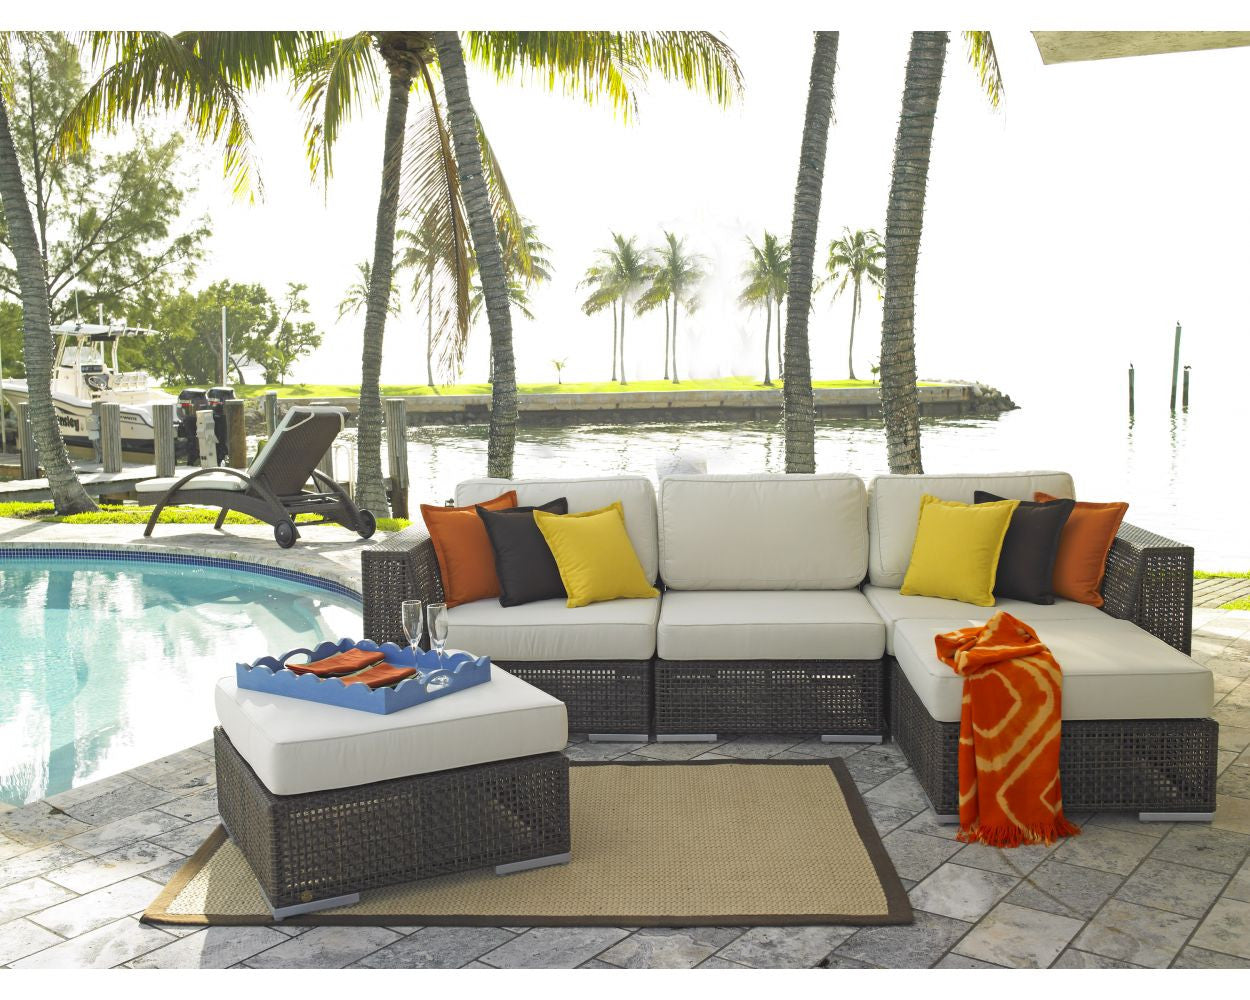 South Sea Outdoor New Java 3-Piece Outdoor Sectional Set w/ Square